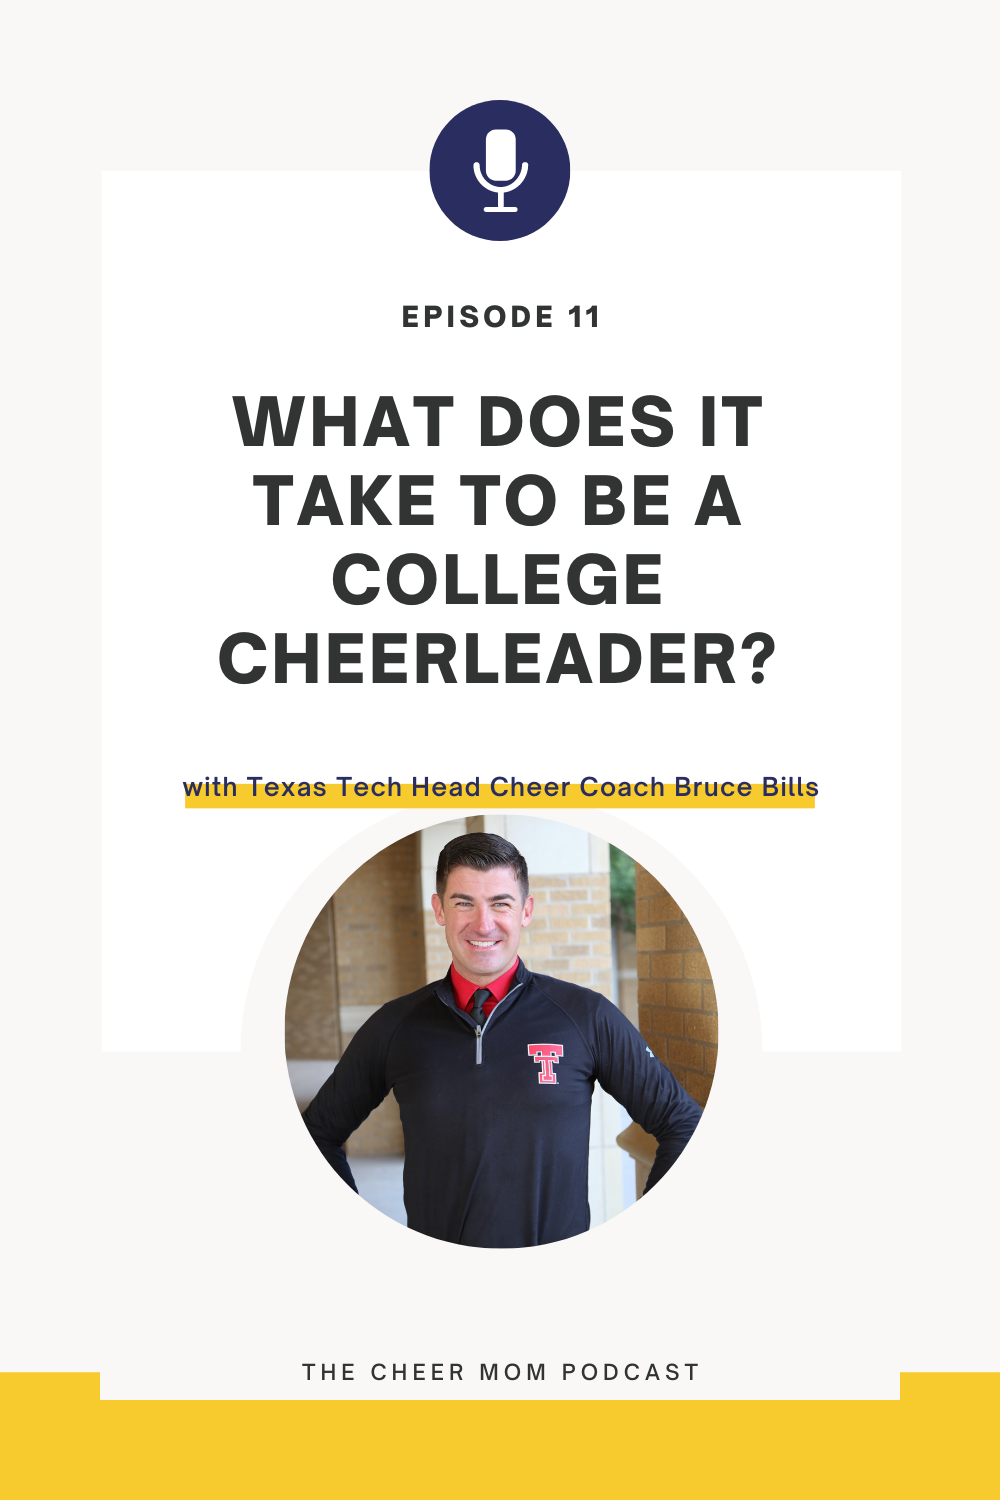 WHAT DOES IT TAKE TO BE A COLLEGE CHEERLEADER? - The Cheer Mom Blog